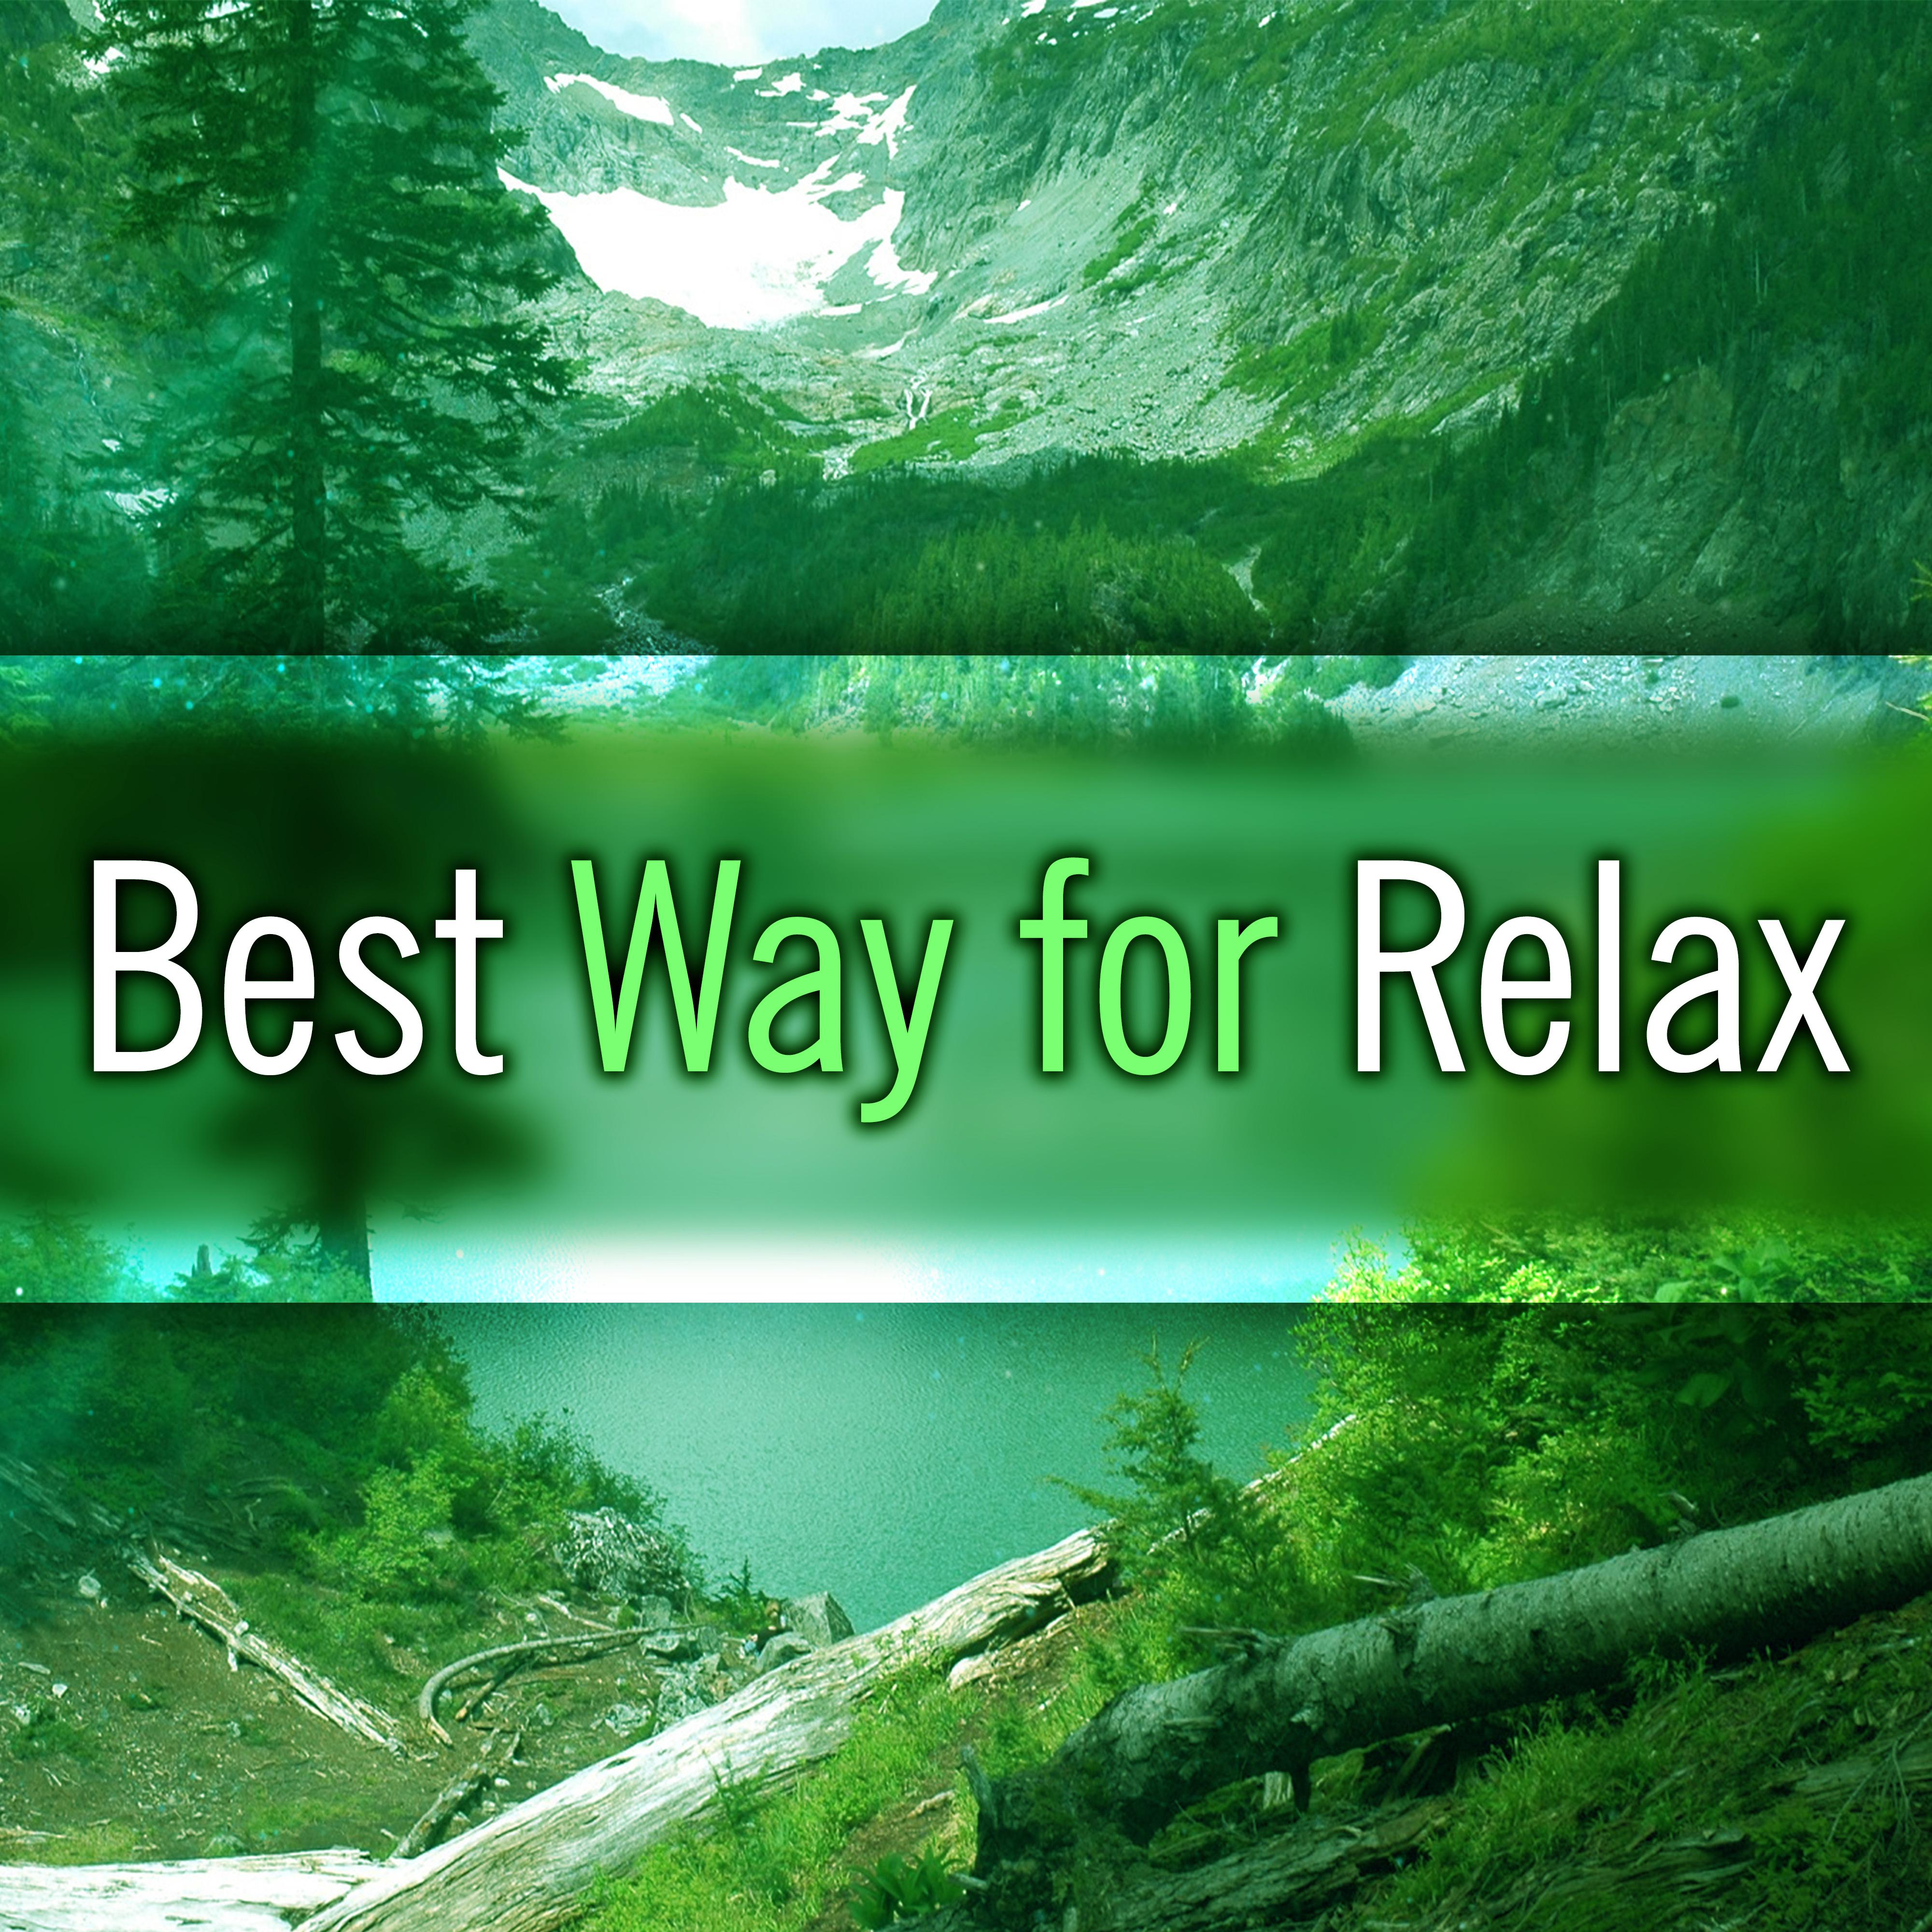 Best Way for Relax – Calming Sounds of Nature, Helpful for Calm Down and Rest, Healing Nature